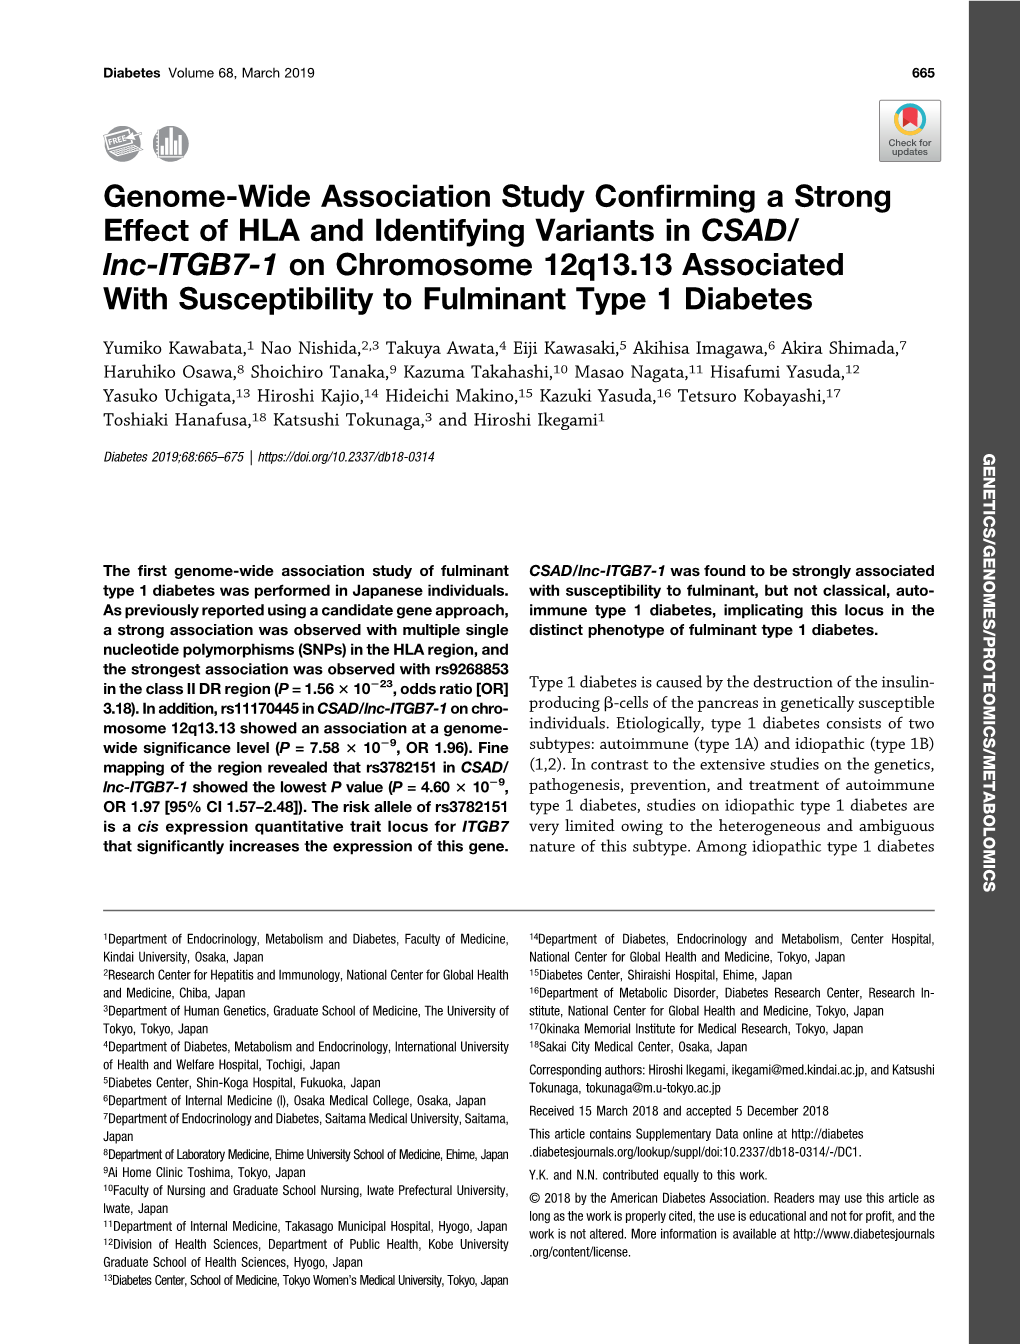 Genome-Wide Association Study Confirming a Strong Effect of HLA